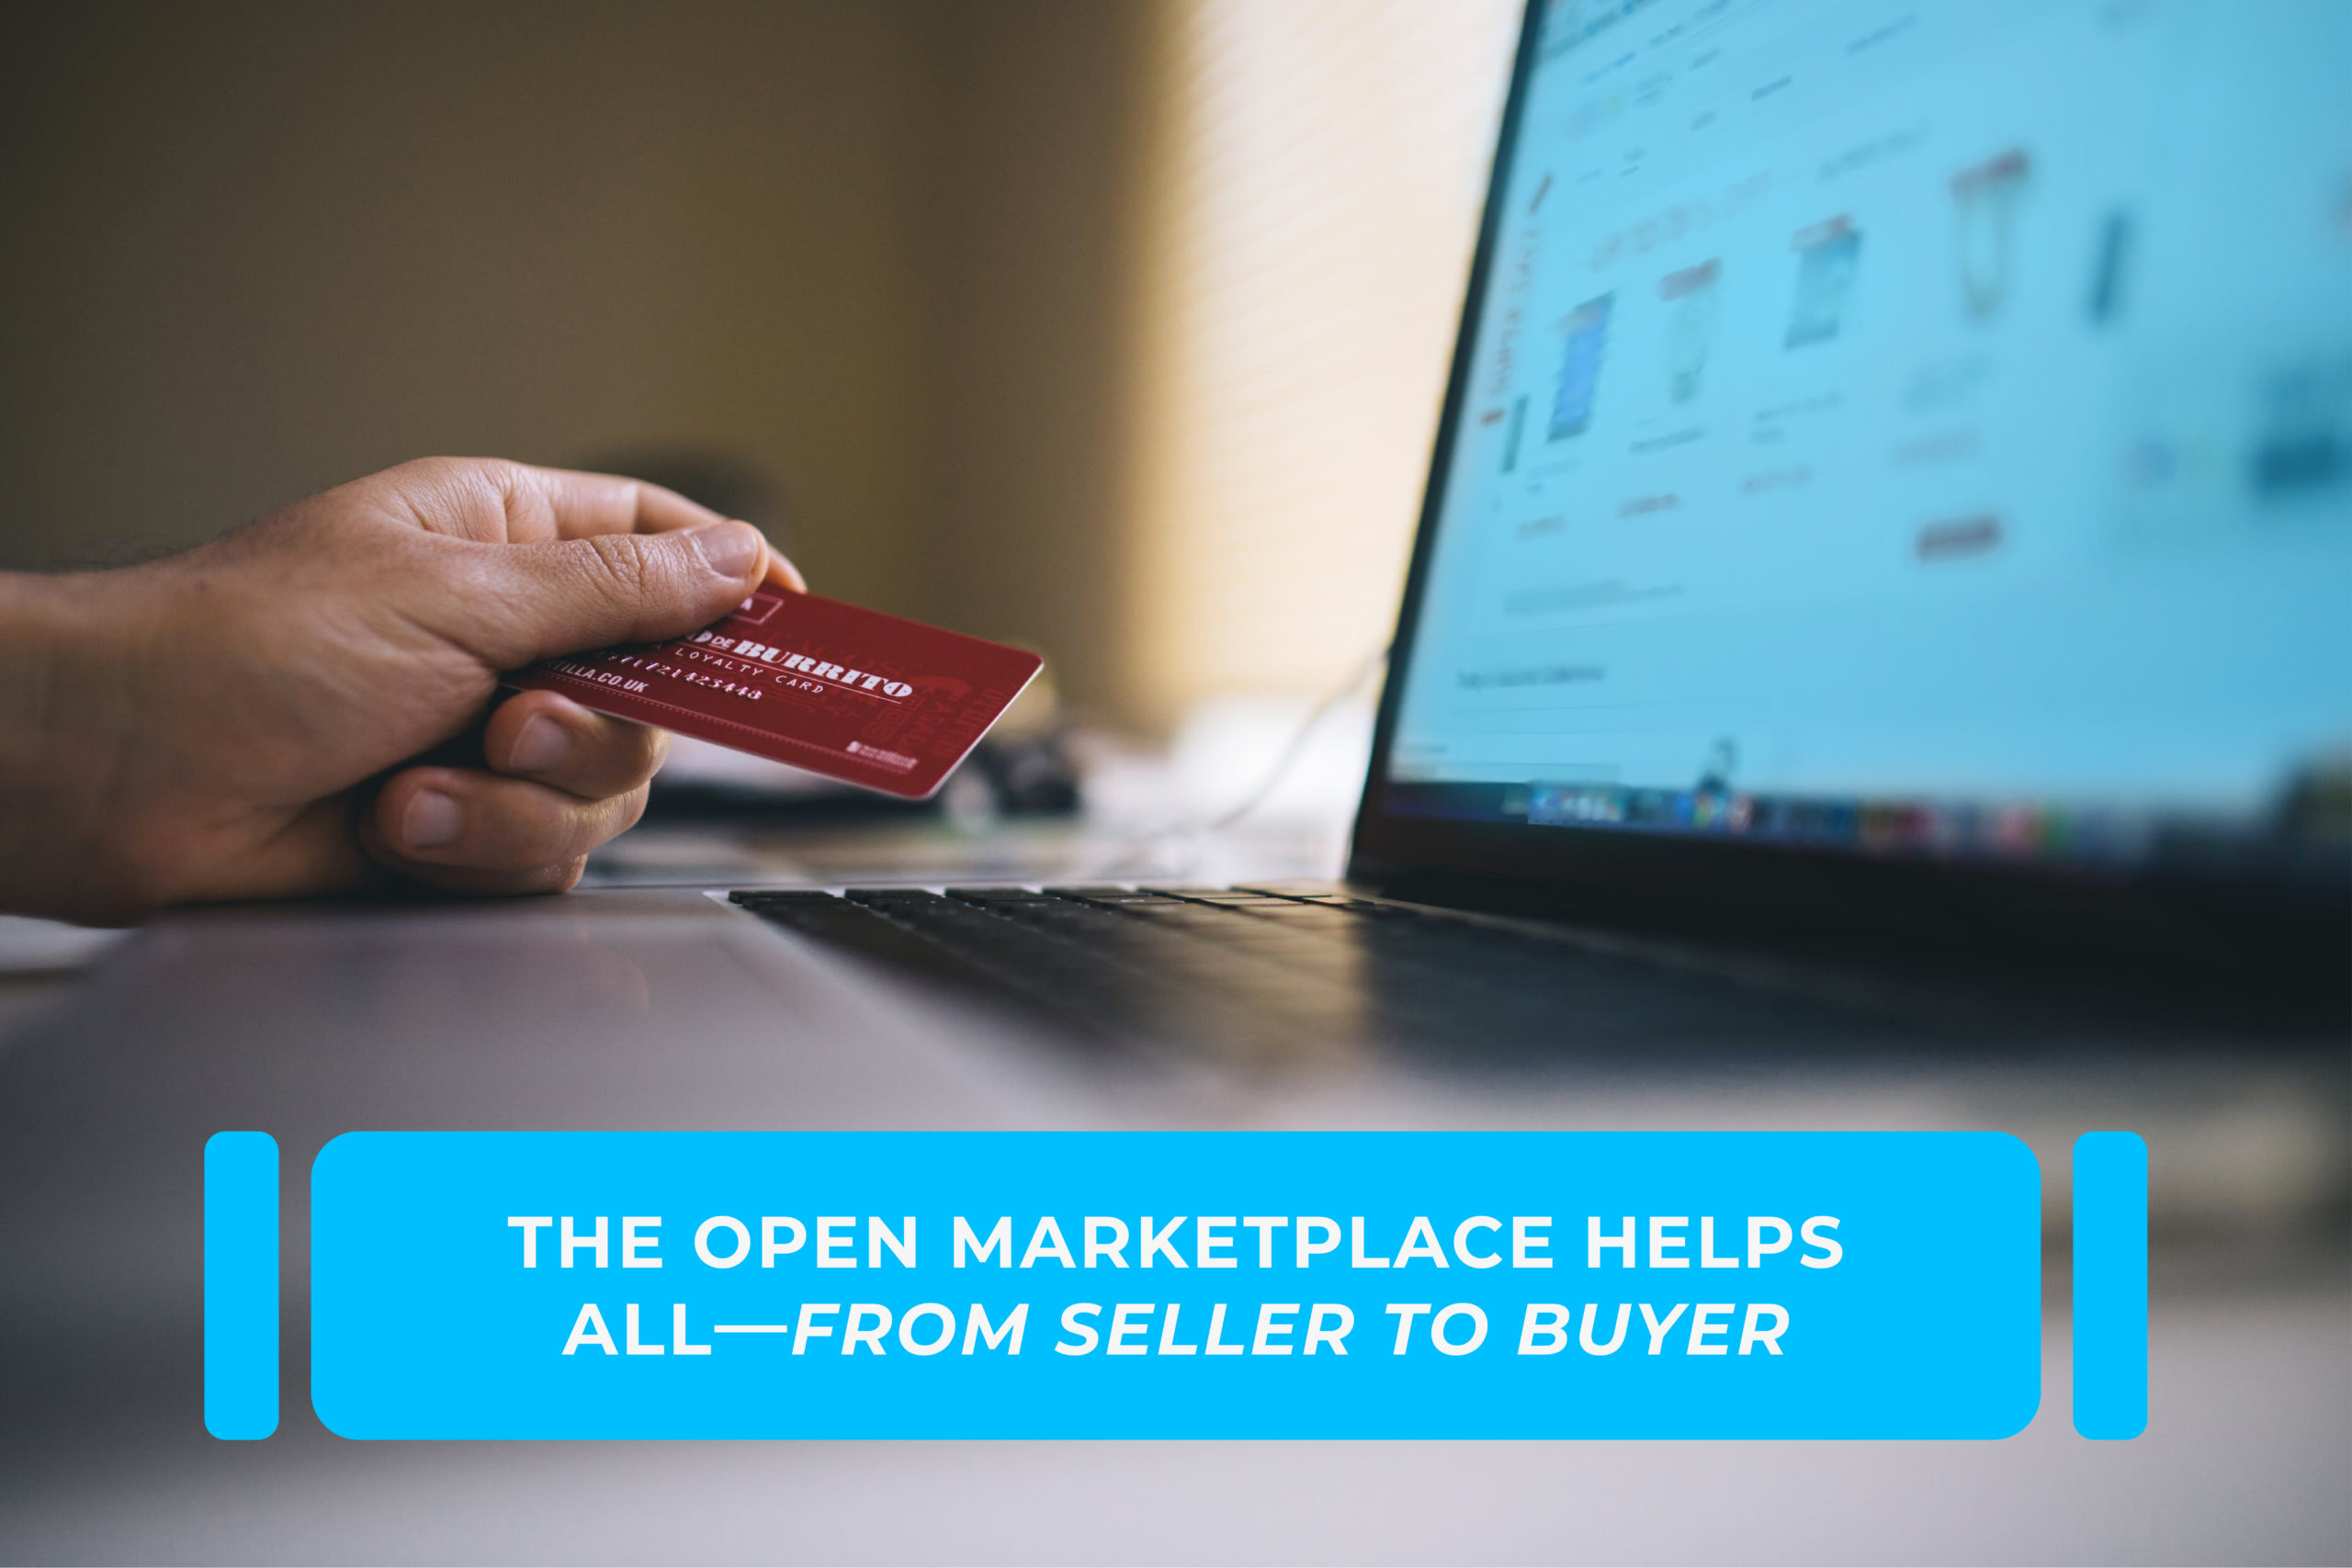 The open marketplace helps every segment of the parts and automotive business, empowering consumers and increasing supplier transparency.